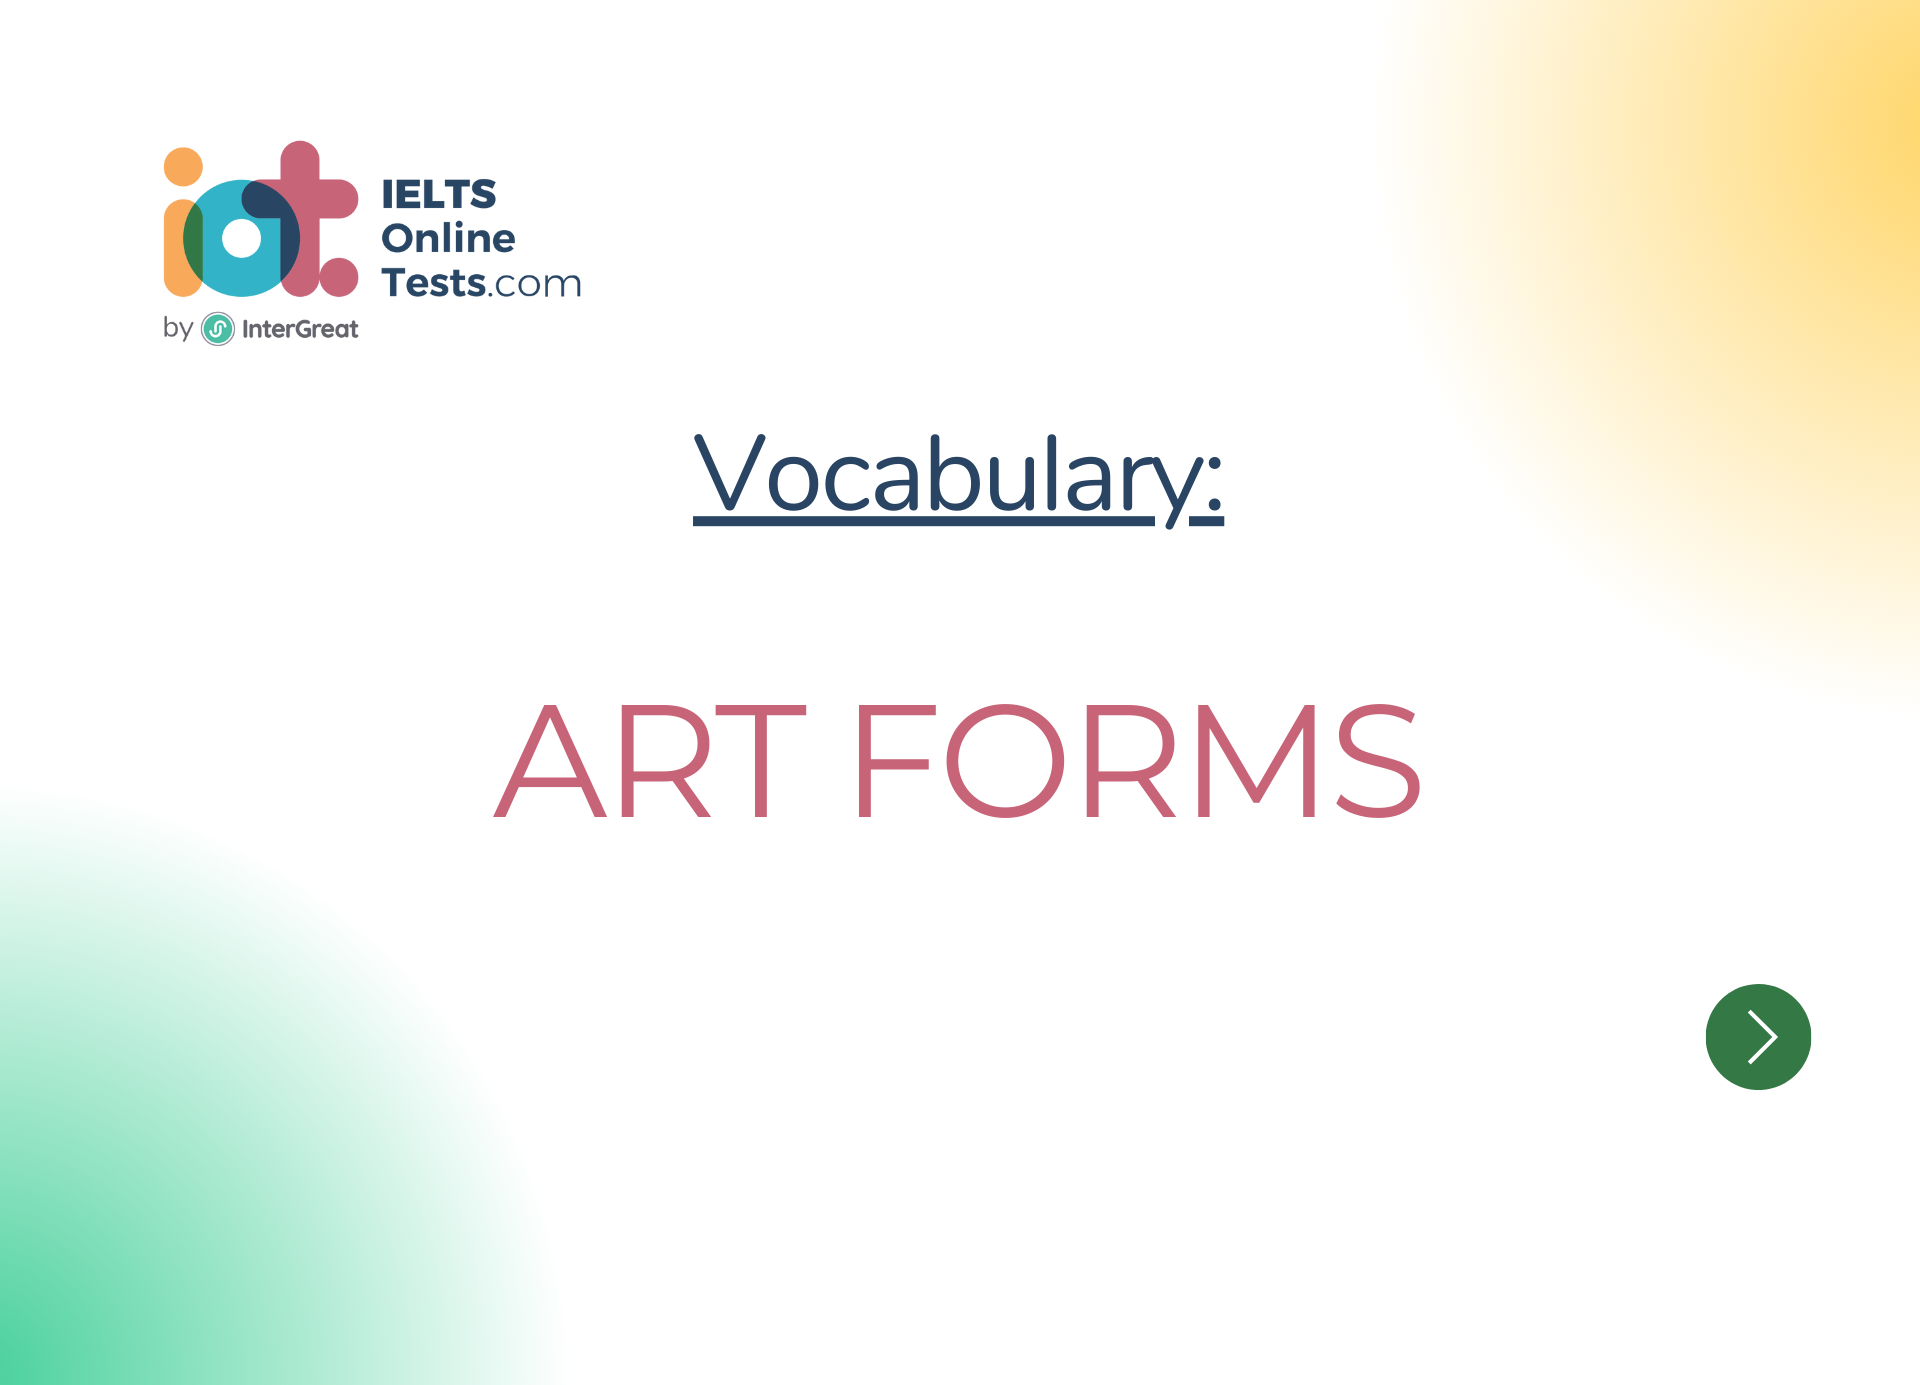 Art forms